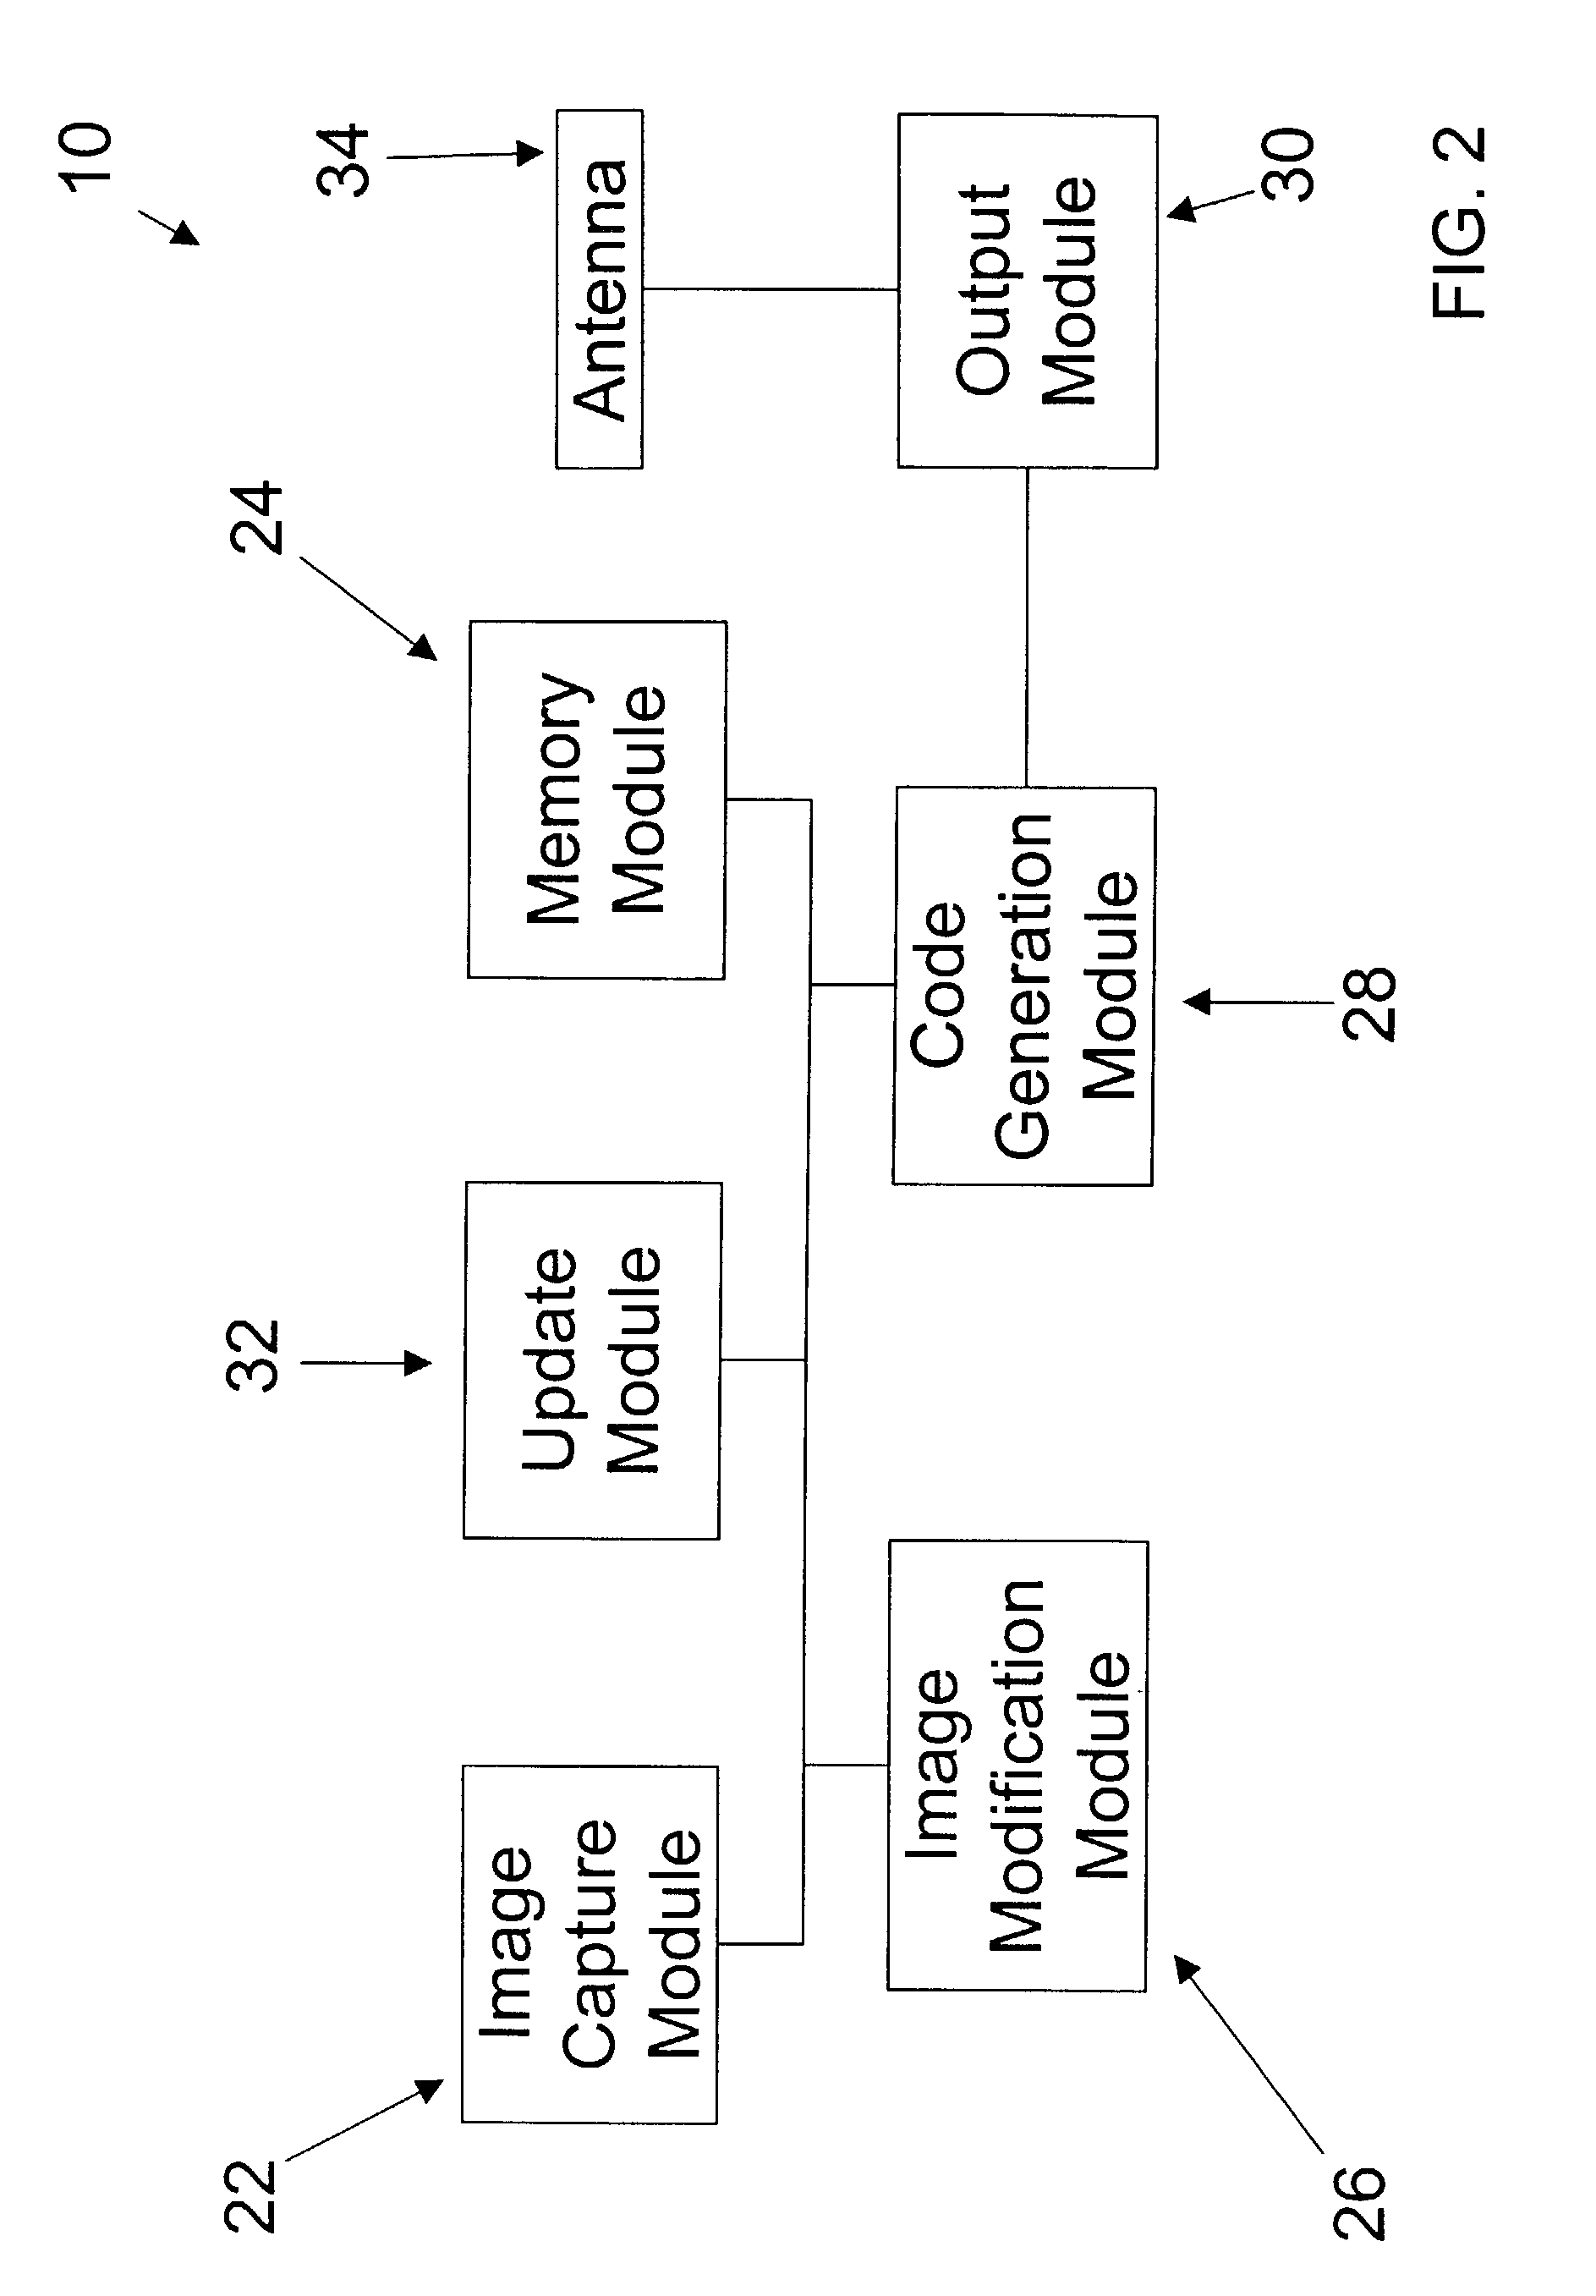 Digital camera with communications functionality